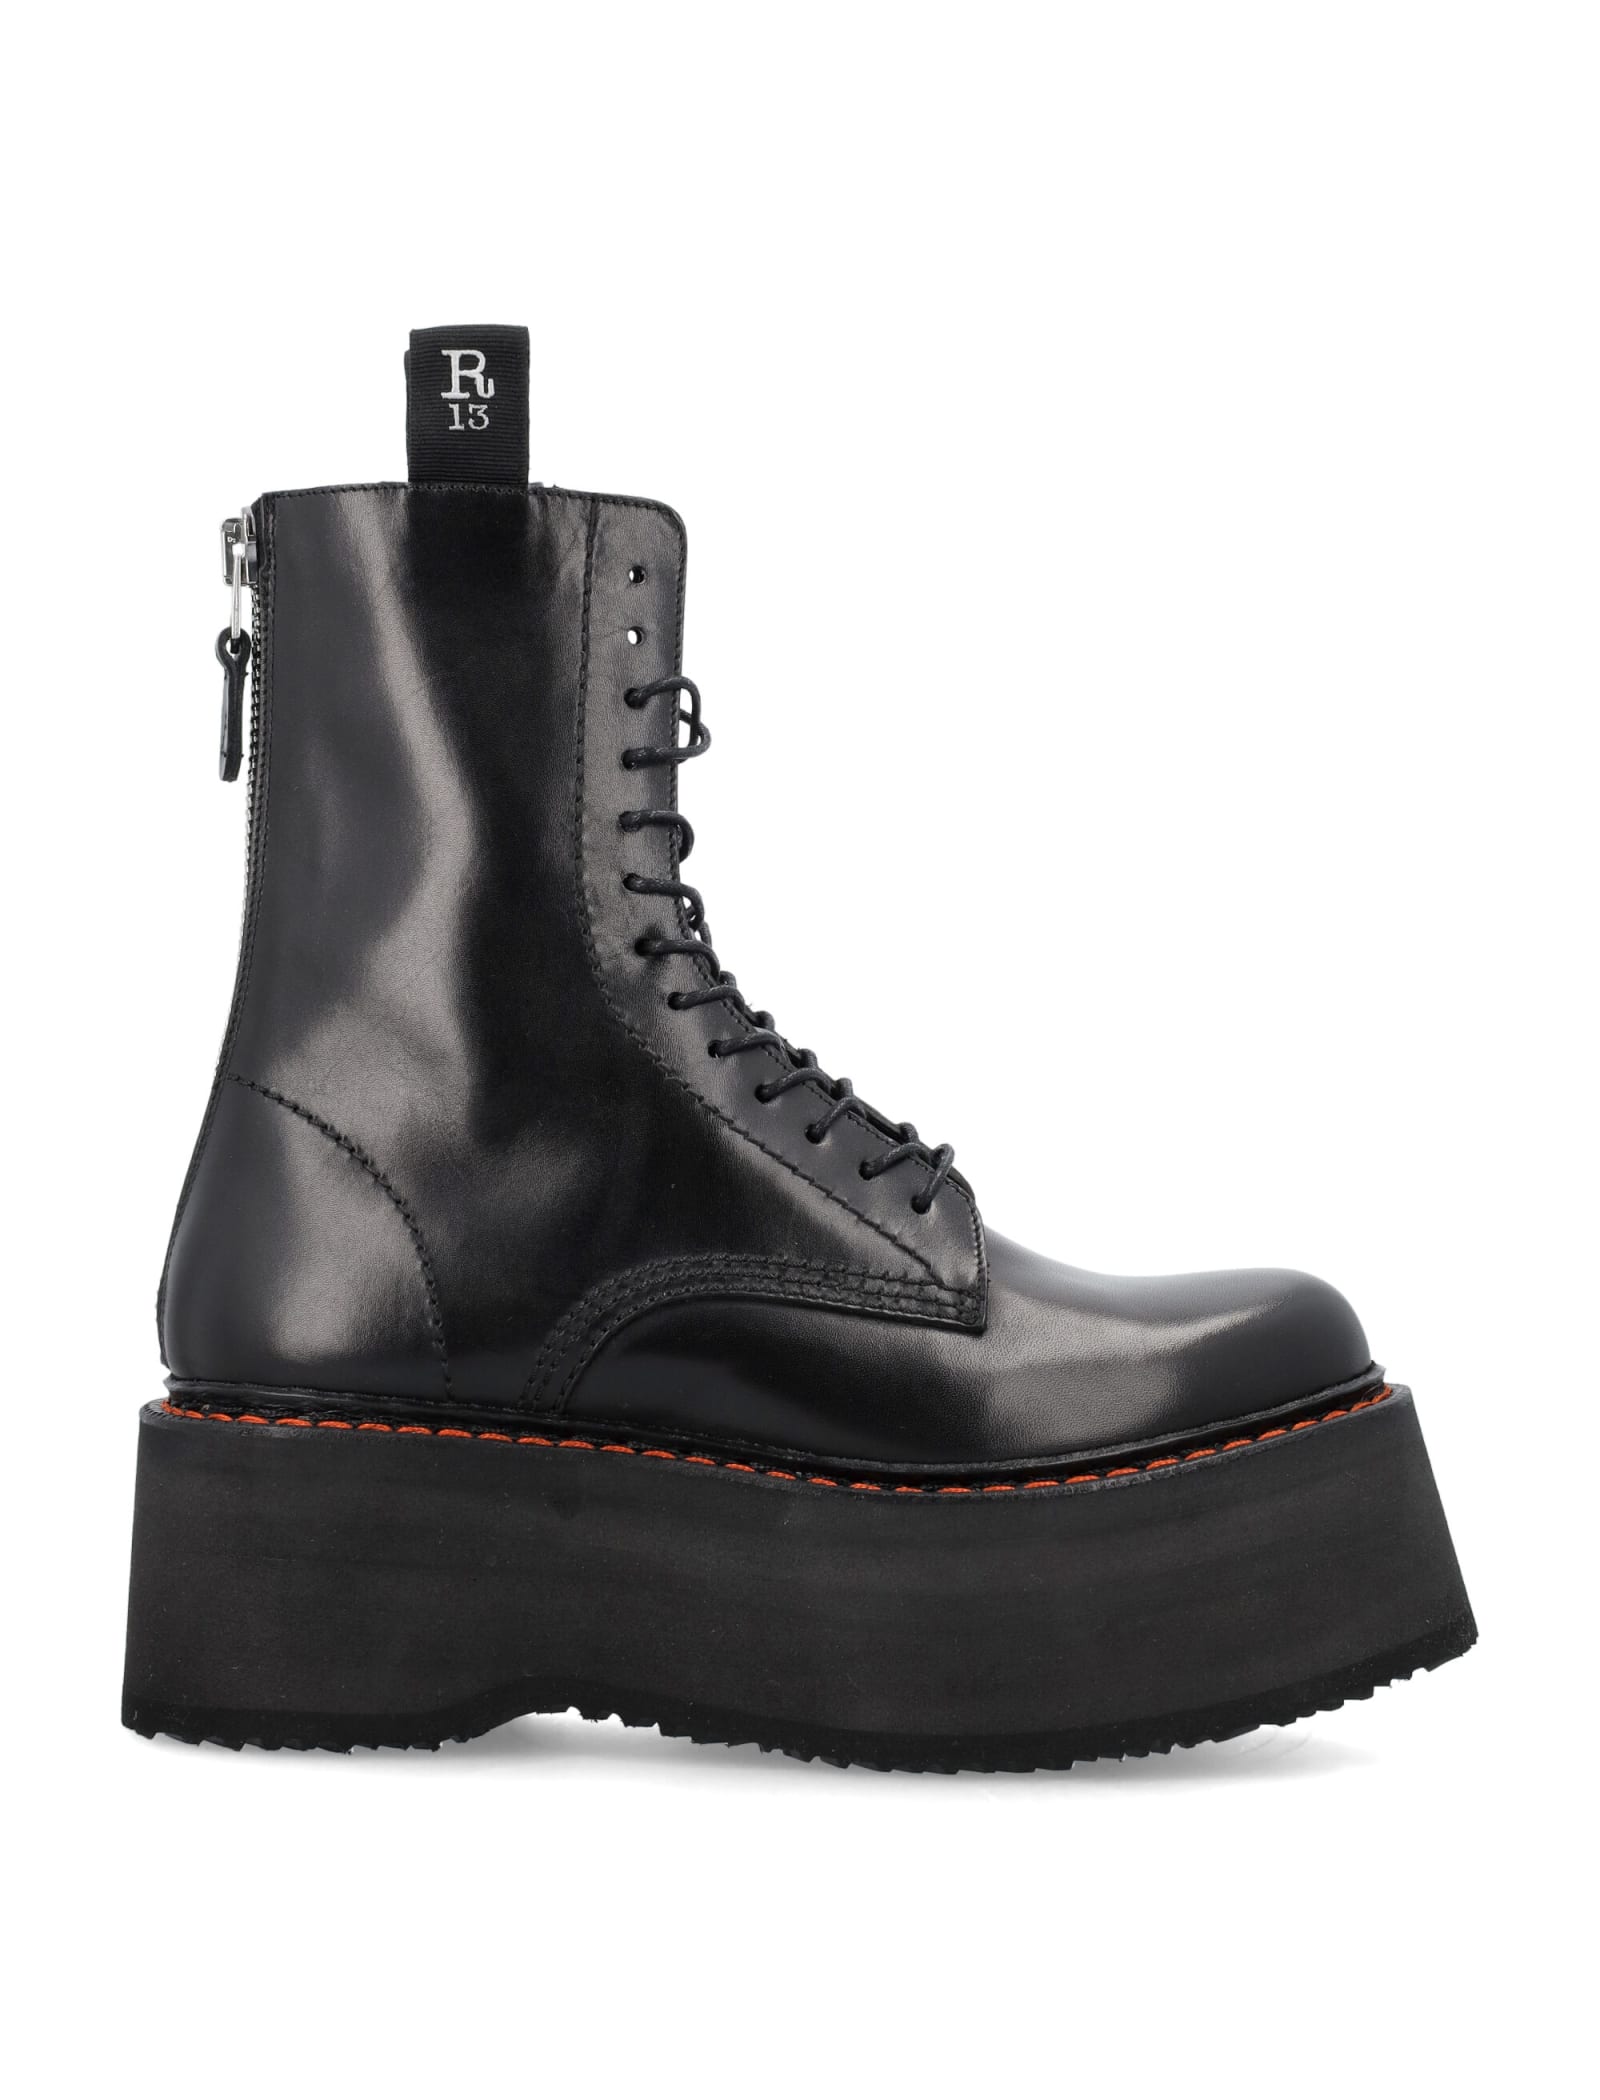 R13 Double Stack Boot